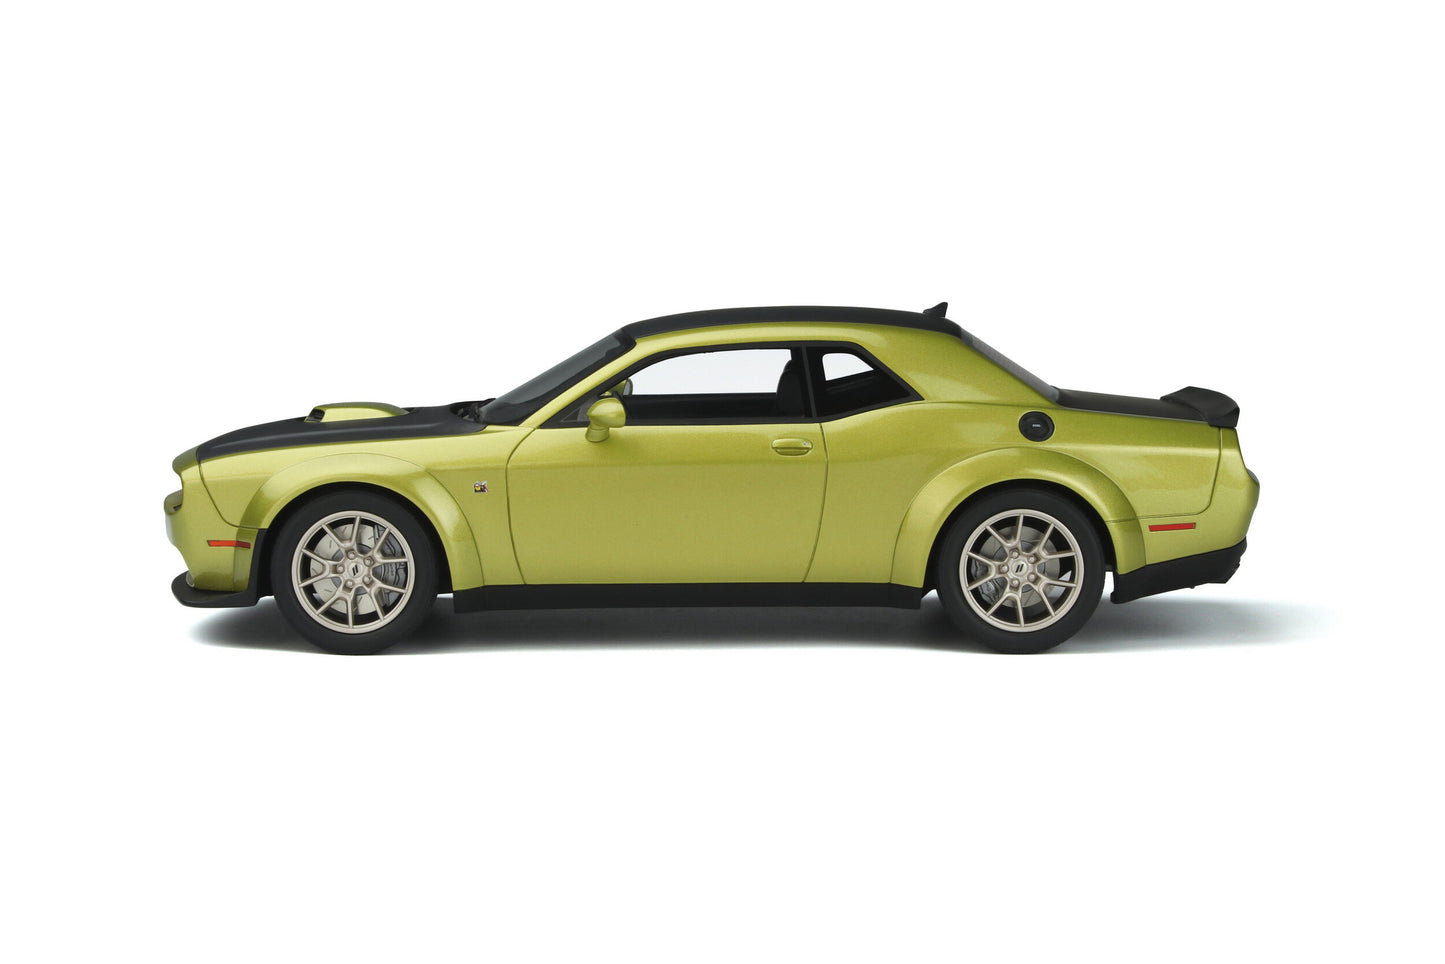 GT Spirit - Dodge Challenger R/T Scat Pack Widebody 50th Anniversary (Gold Rush) 1:18 Scale Model Car